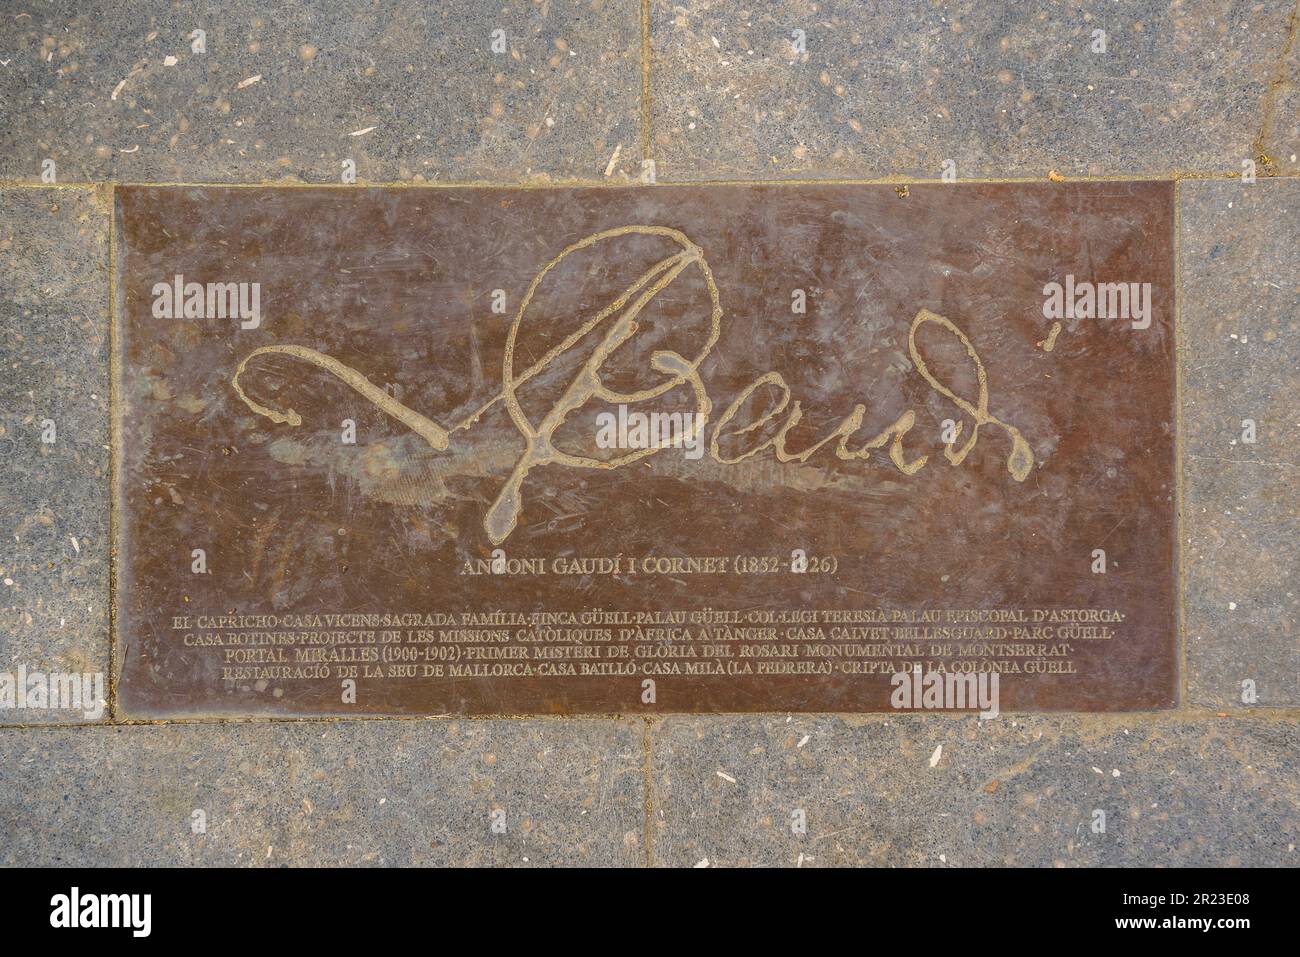 Plaque with the signature of Antoni Gaudí on the floor of the Miralles door, one of his lesser-known works in Barcelona (Catalonia, Spain) Stock Photo